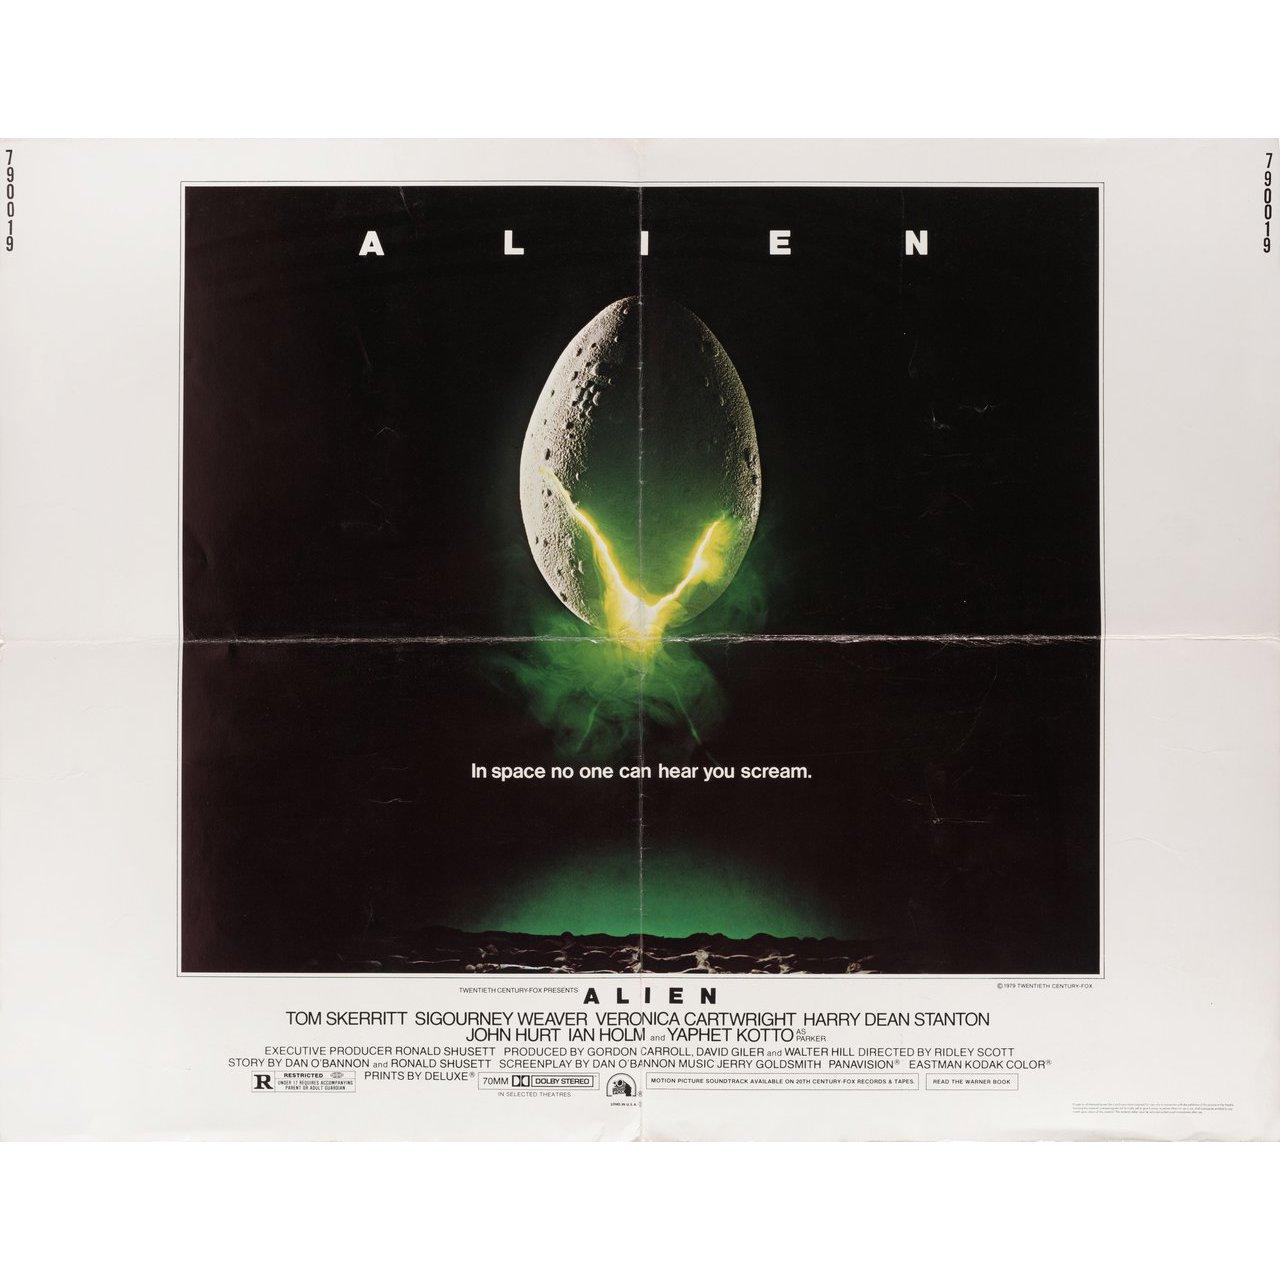 Original 1979 U.S. half sheet poster for the film Alien directed by Ridley Scott with Tom Skerritt / Sigourney Weaver / Veronica Cartwright / Harry Dean Stanton. Very Good-Fine condition, folded. Many original posters were issued folded or were